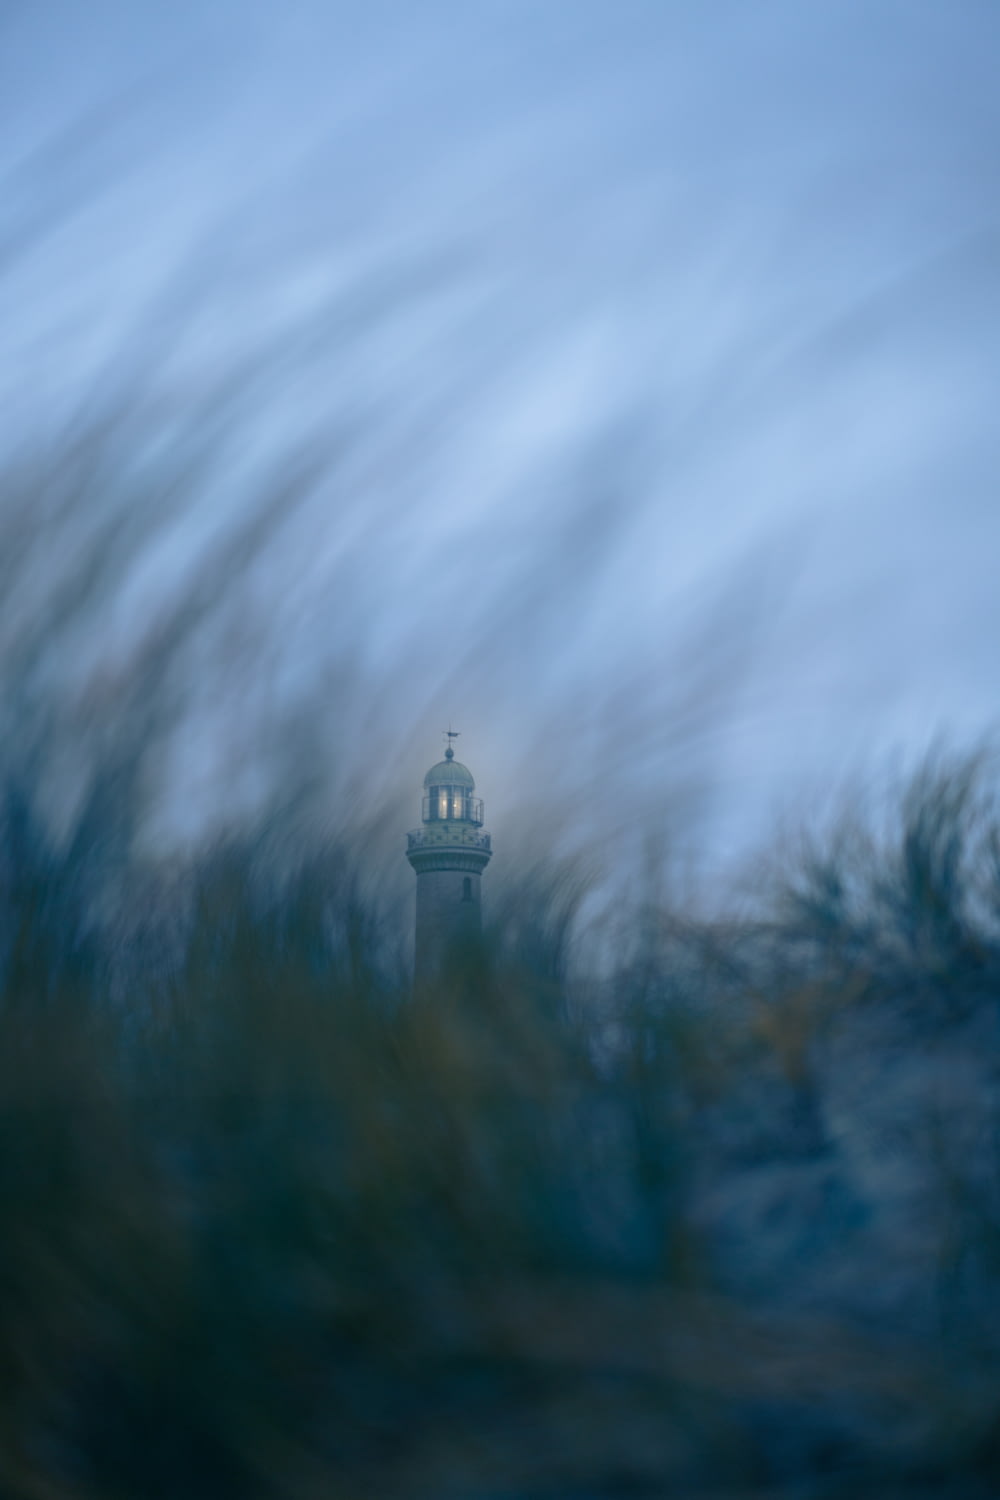 a blurry photo of a clock tower in the distance